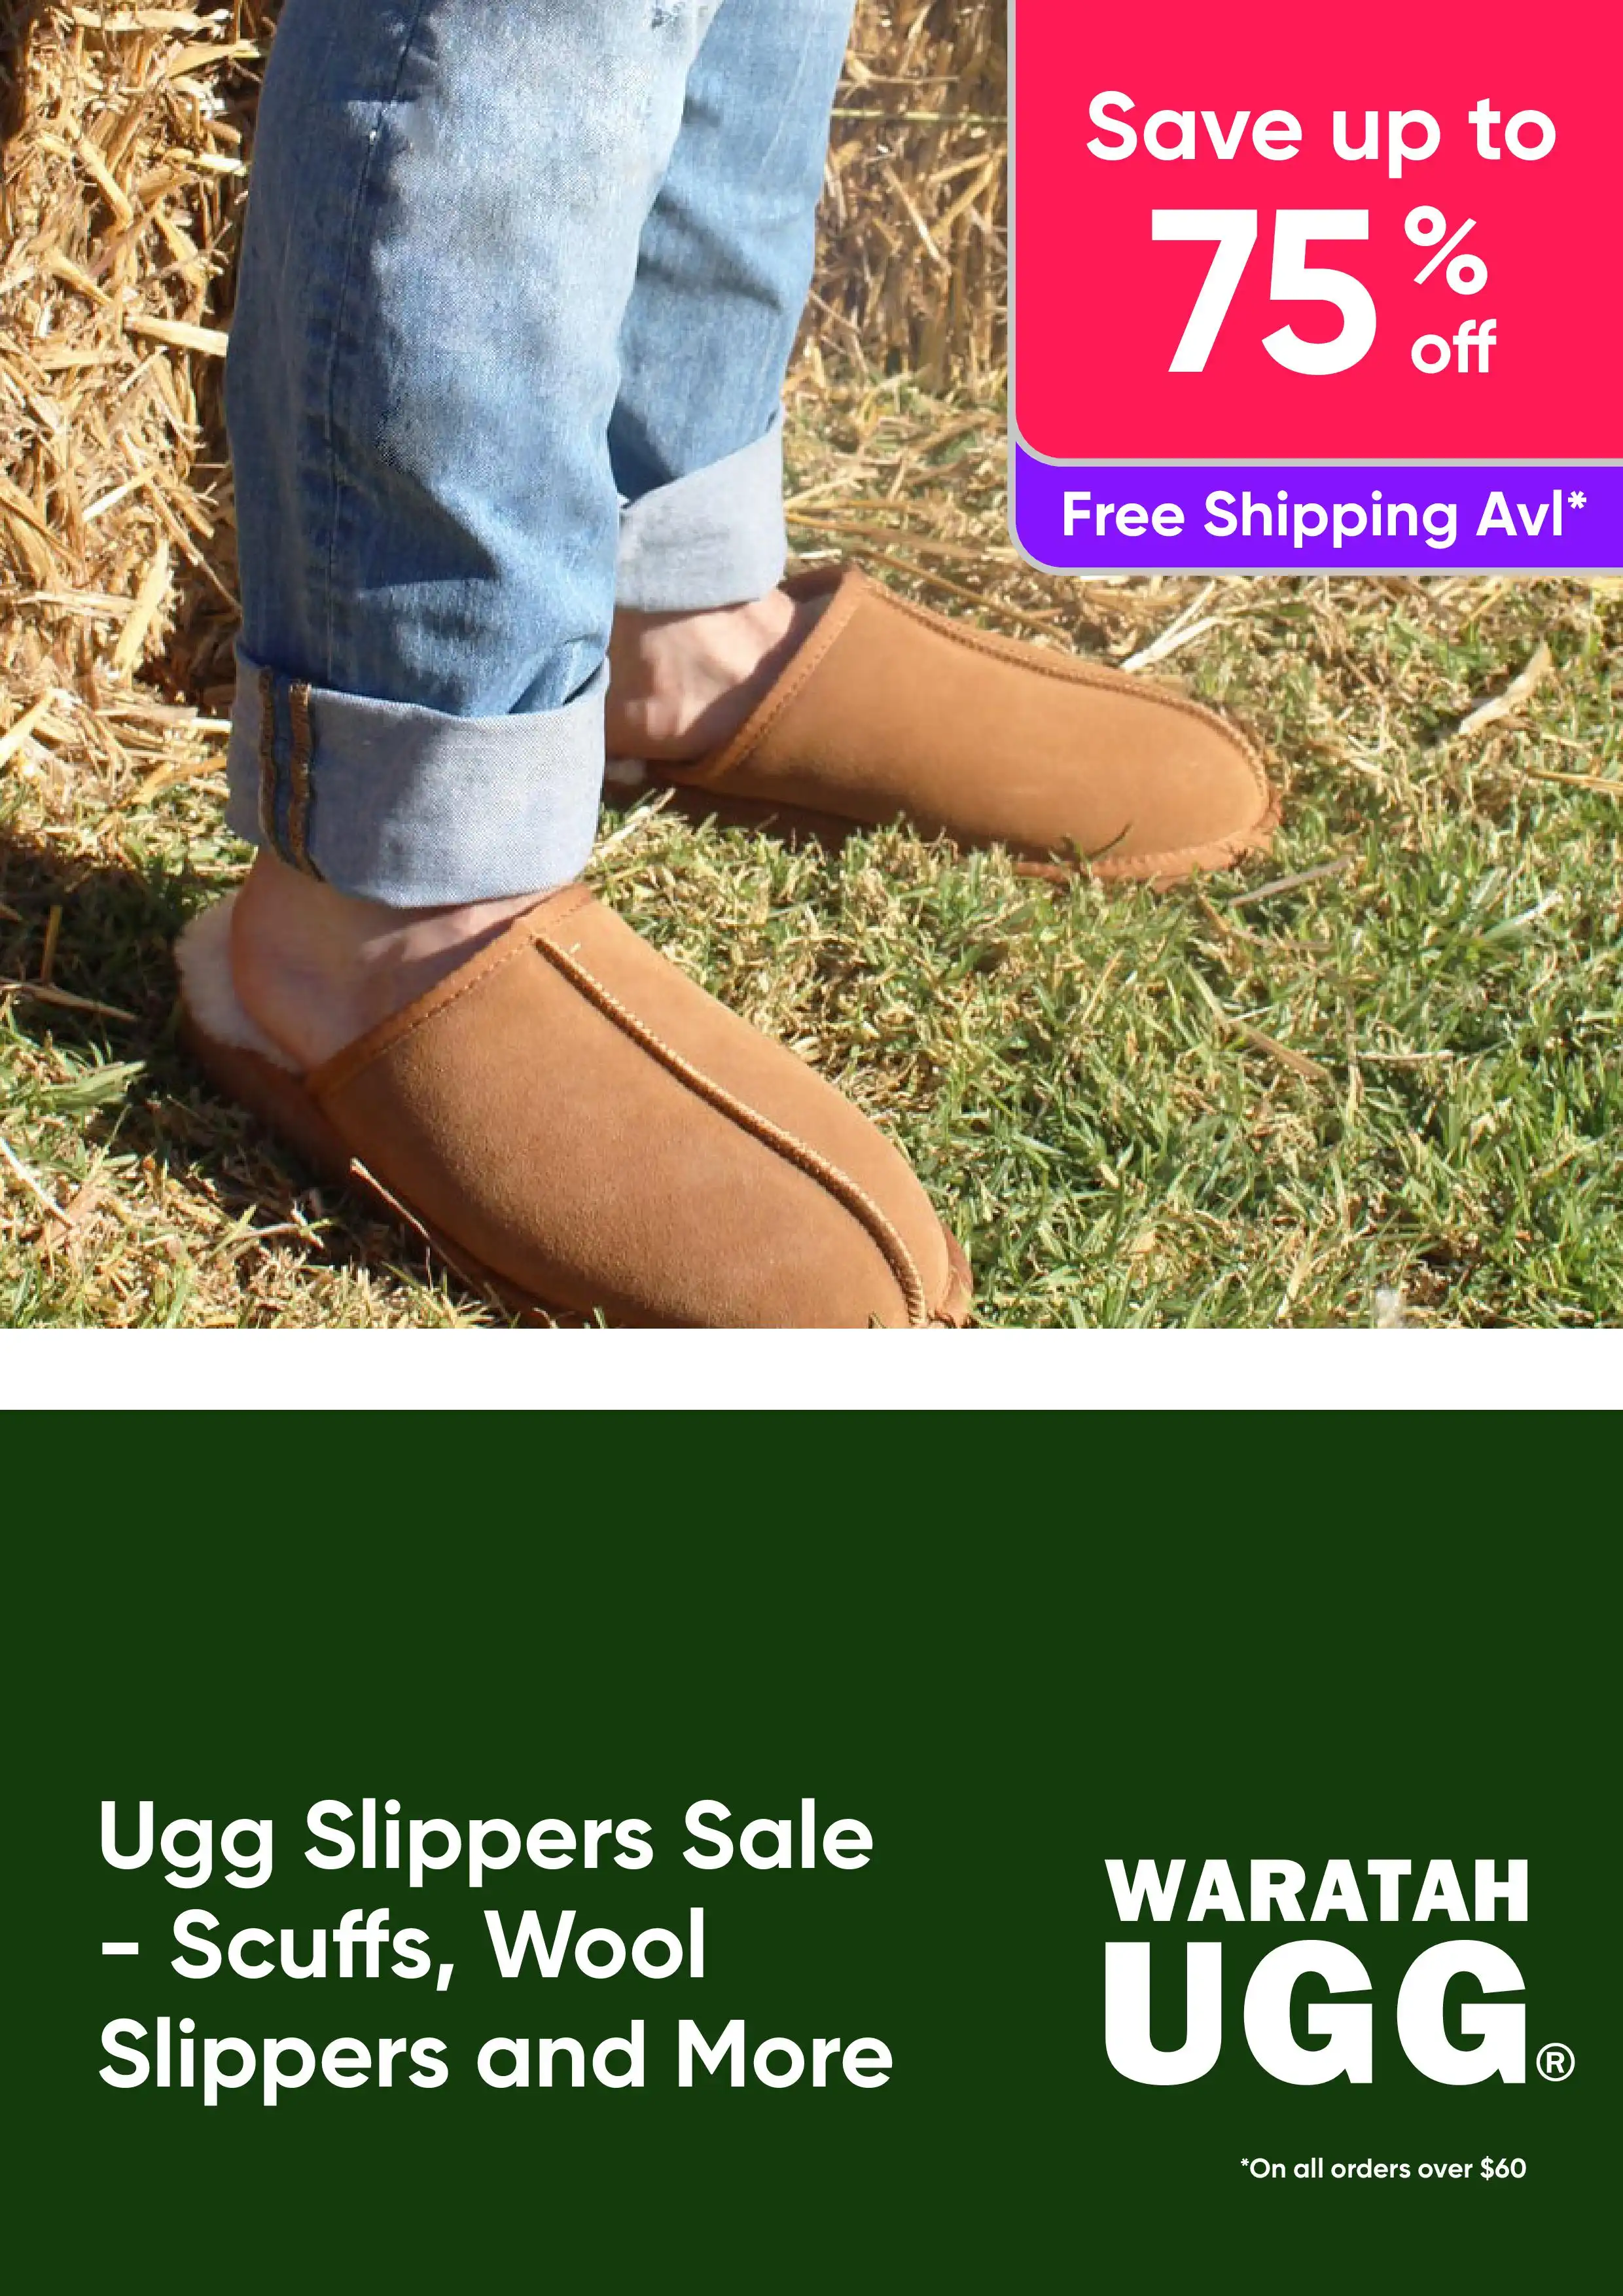 Ugg Slippers Sale - Save Up to 75% Off Scuffs, Wool Slippers and More by Waratah Ugg